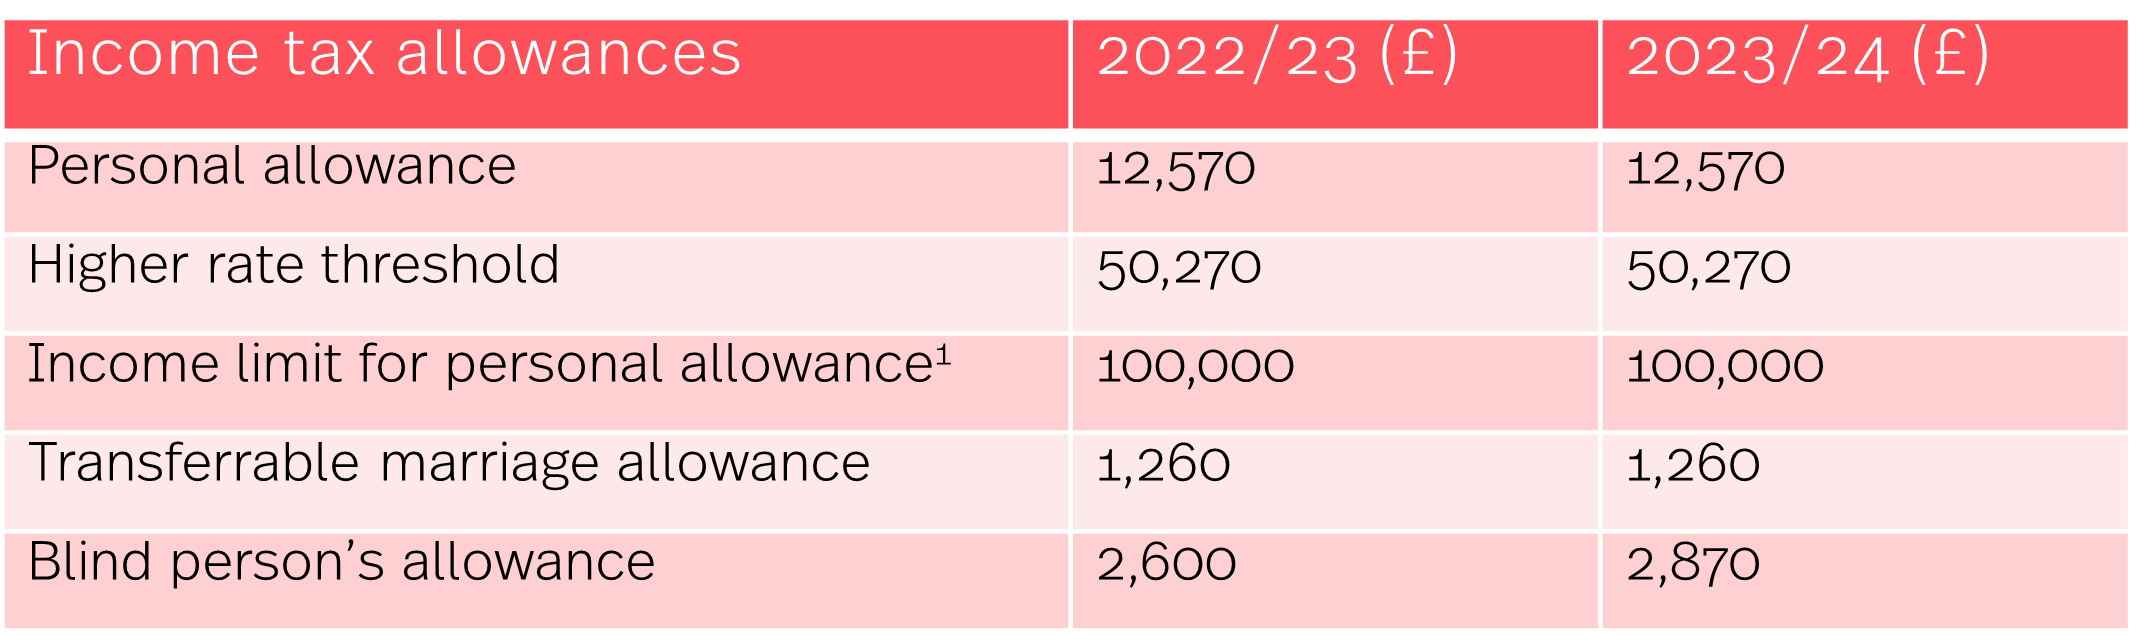 Autumn Statement 2022 HMRC tax rates and allowances for 2023/24